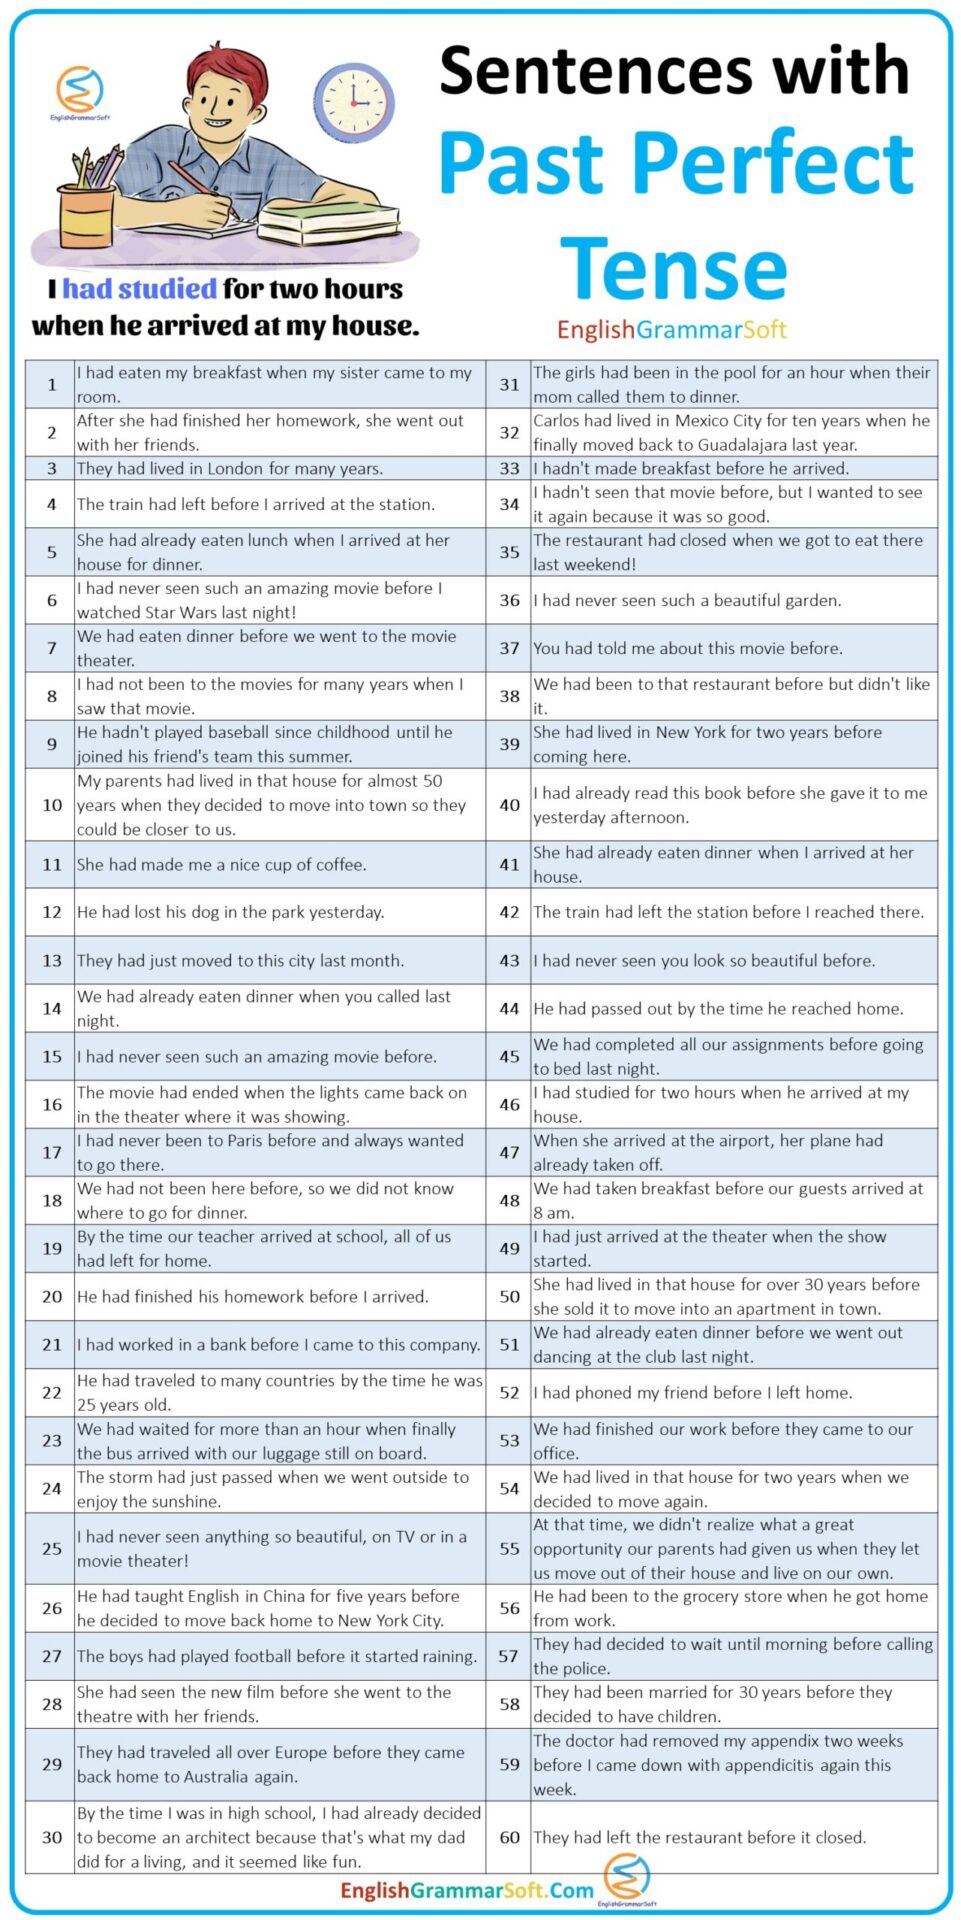 100 Sentences with Past Perfect Tense